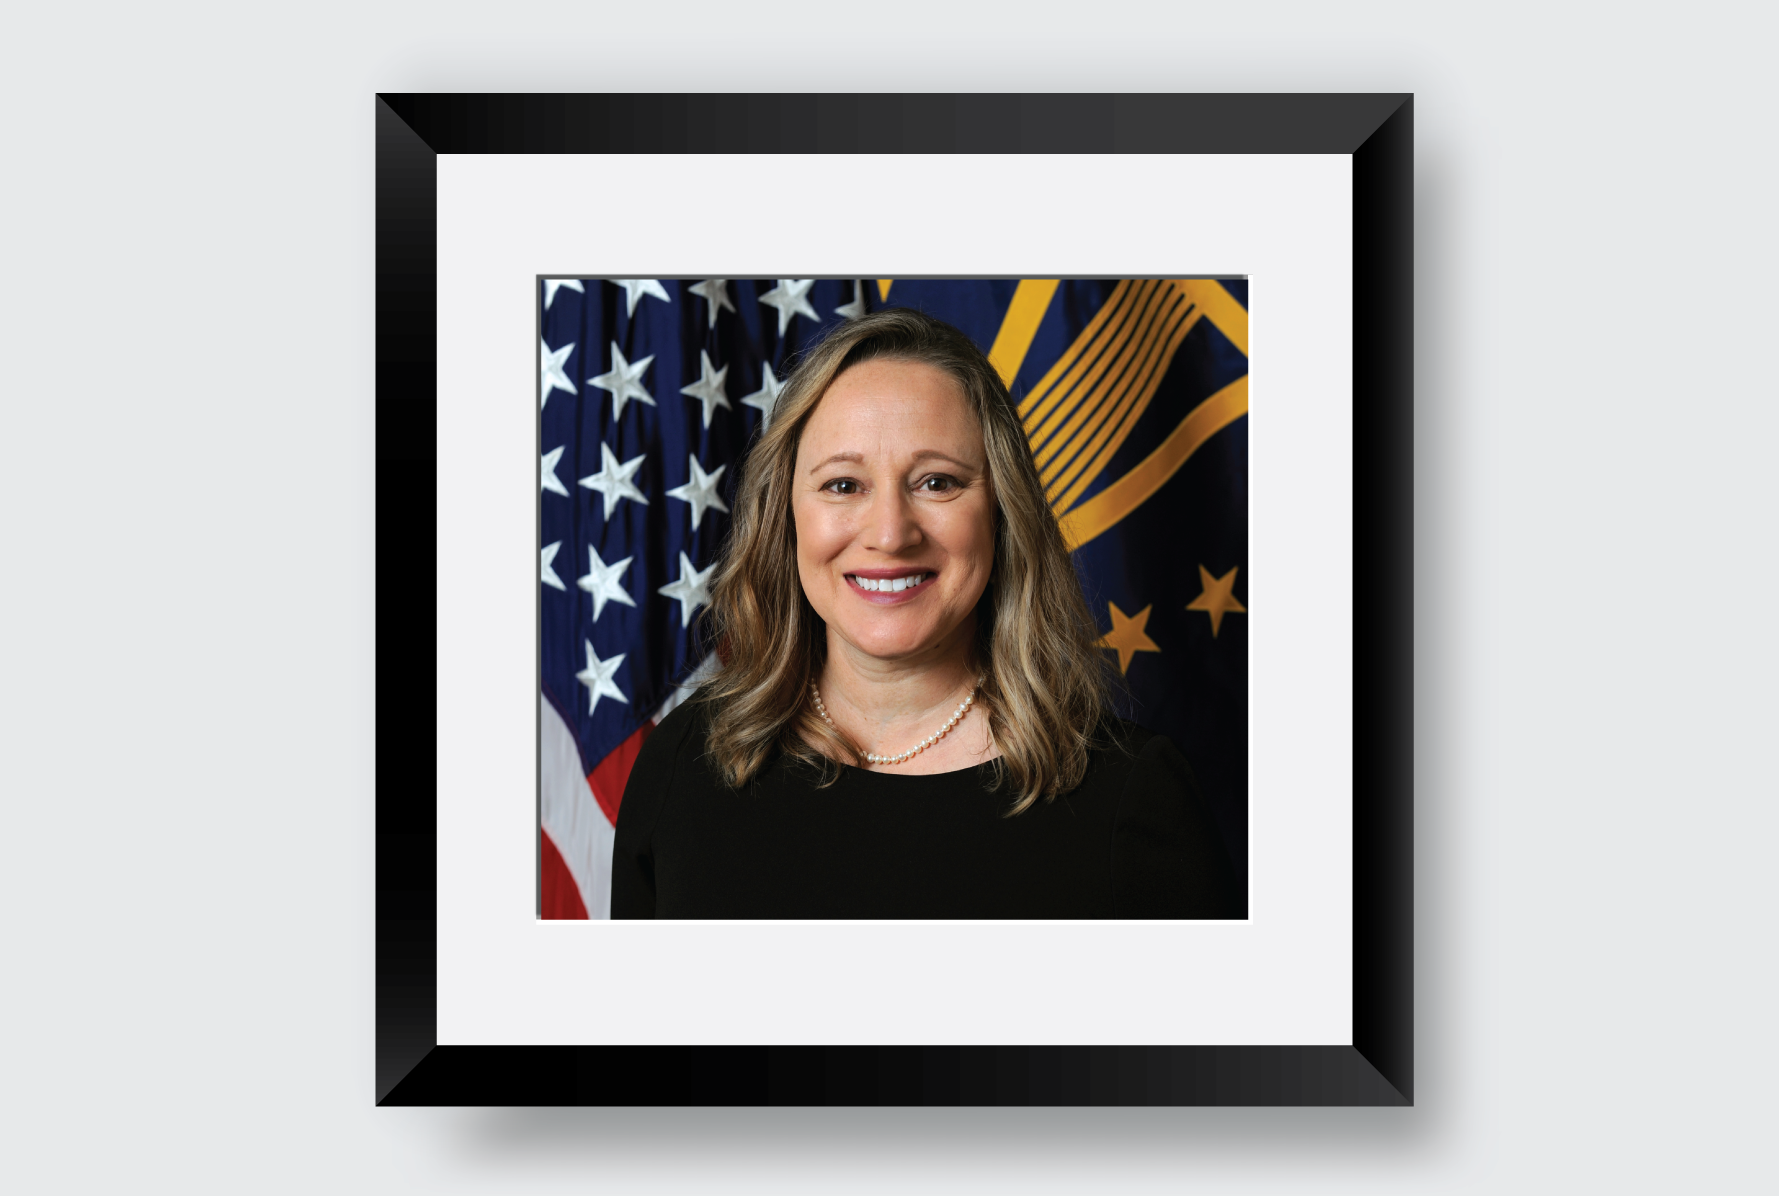 The Department of Defense Appoints Dr. Liz Clark as New Director, Defense Suicide Prevention Office